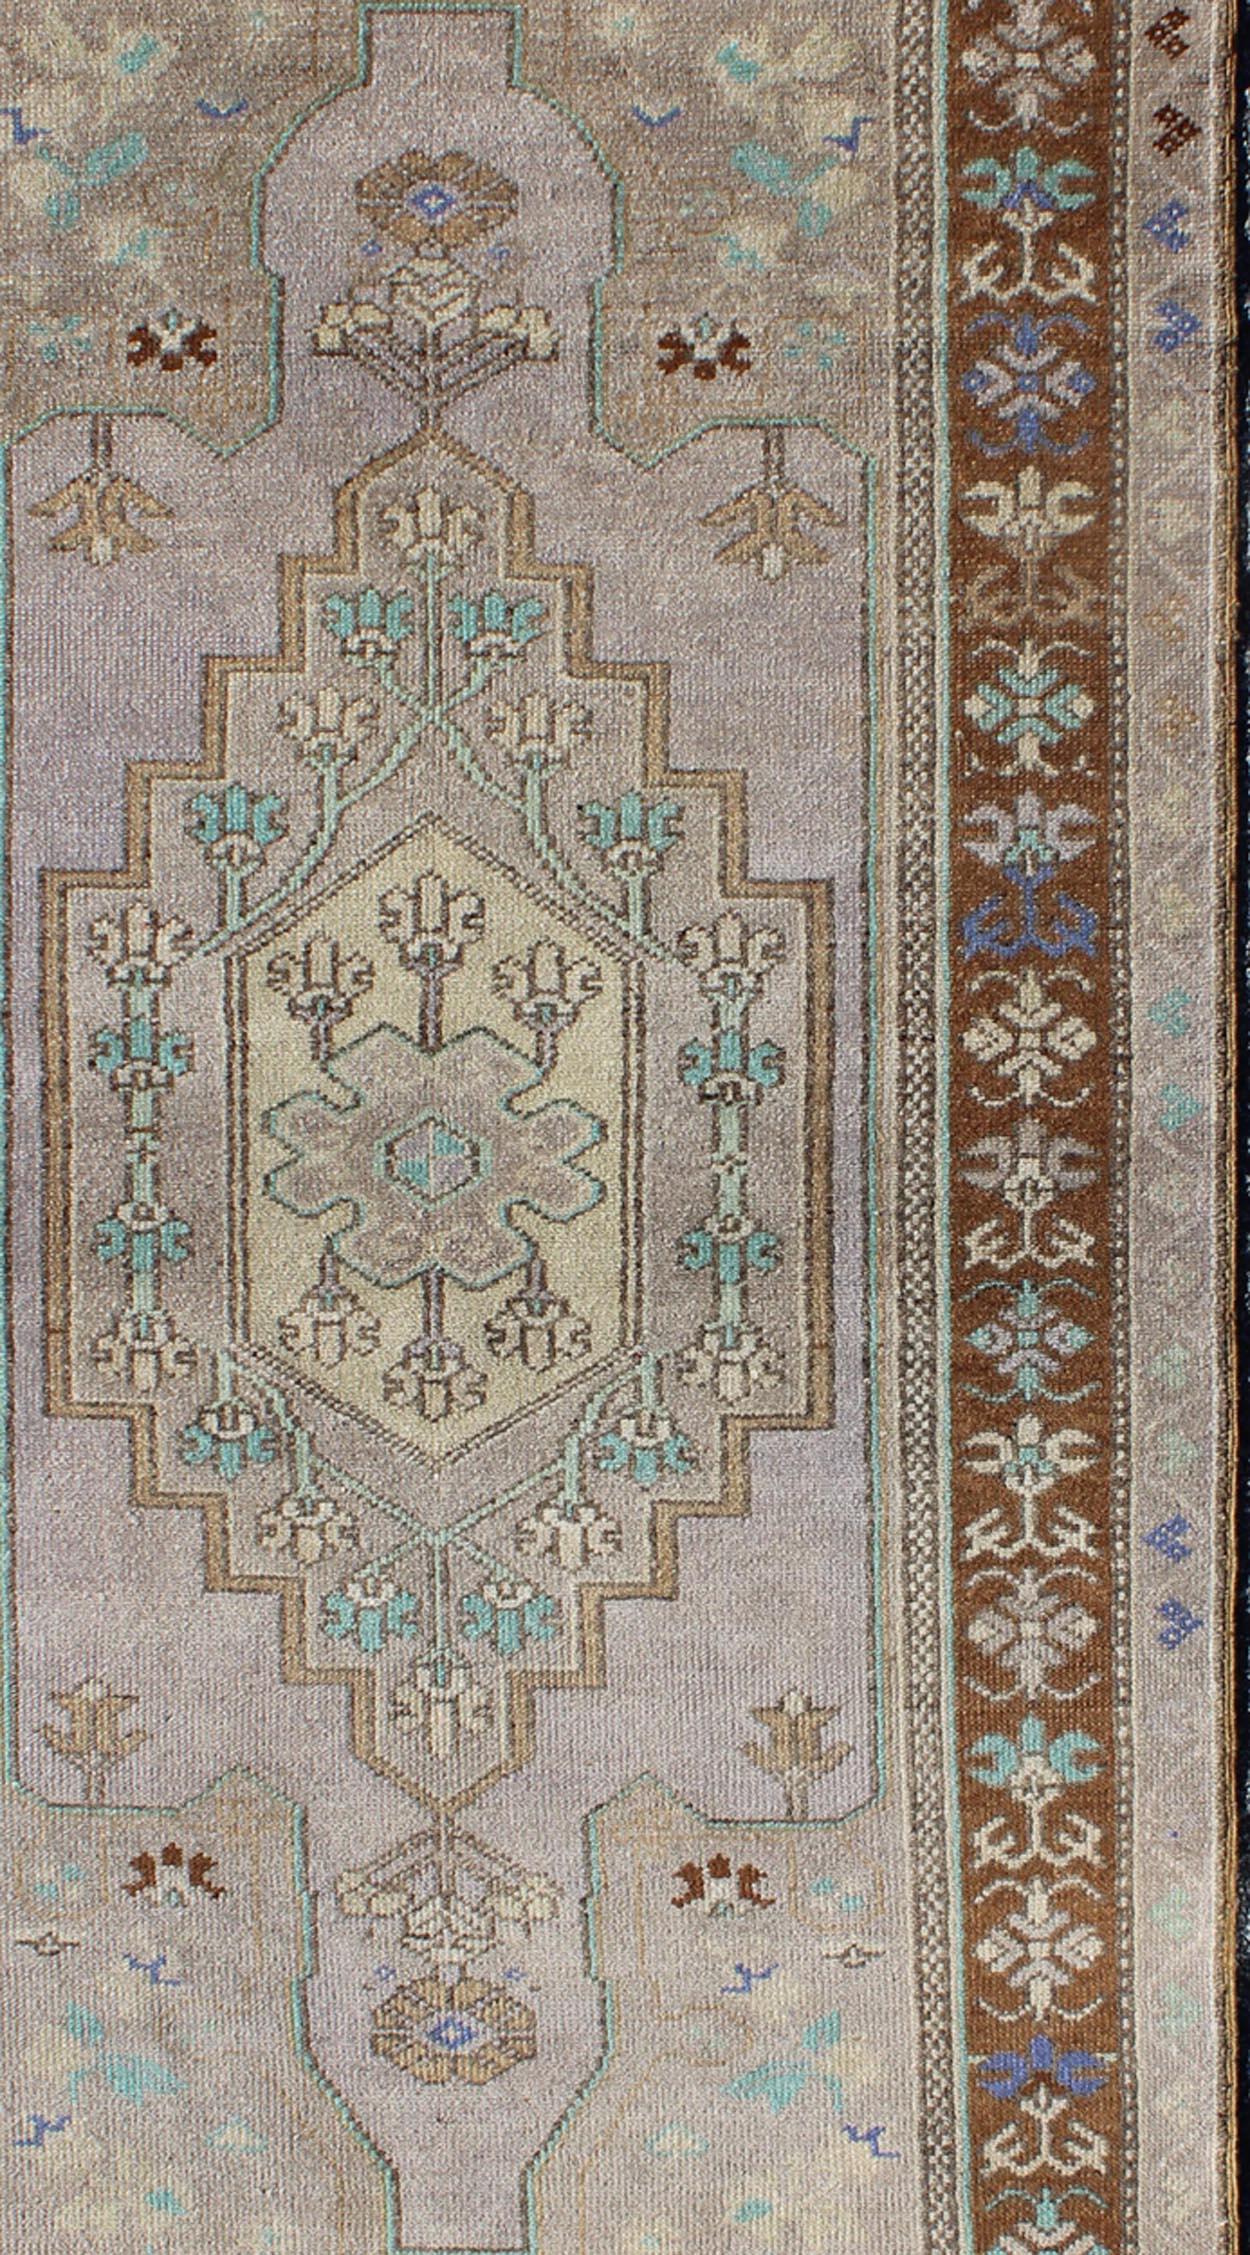 This vintage Turkish Oushak rug (circa mid-20th century) features a unique blend of colors. The multi-layered central medallion is complemented by a symmetrical set of floral motifs in the surrounding cornices and border. The various shades of Soft